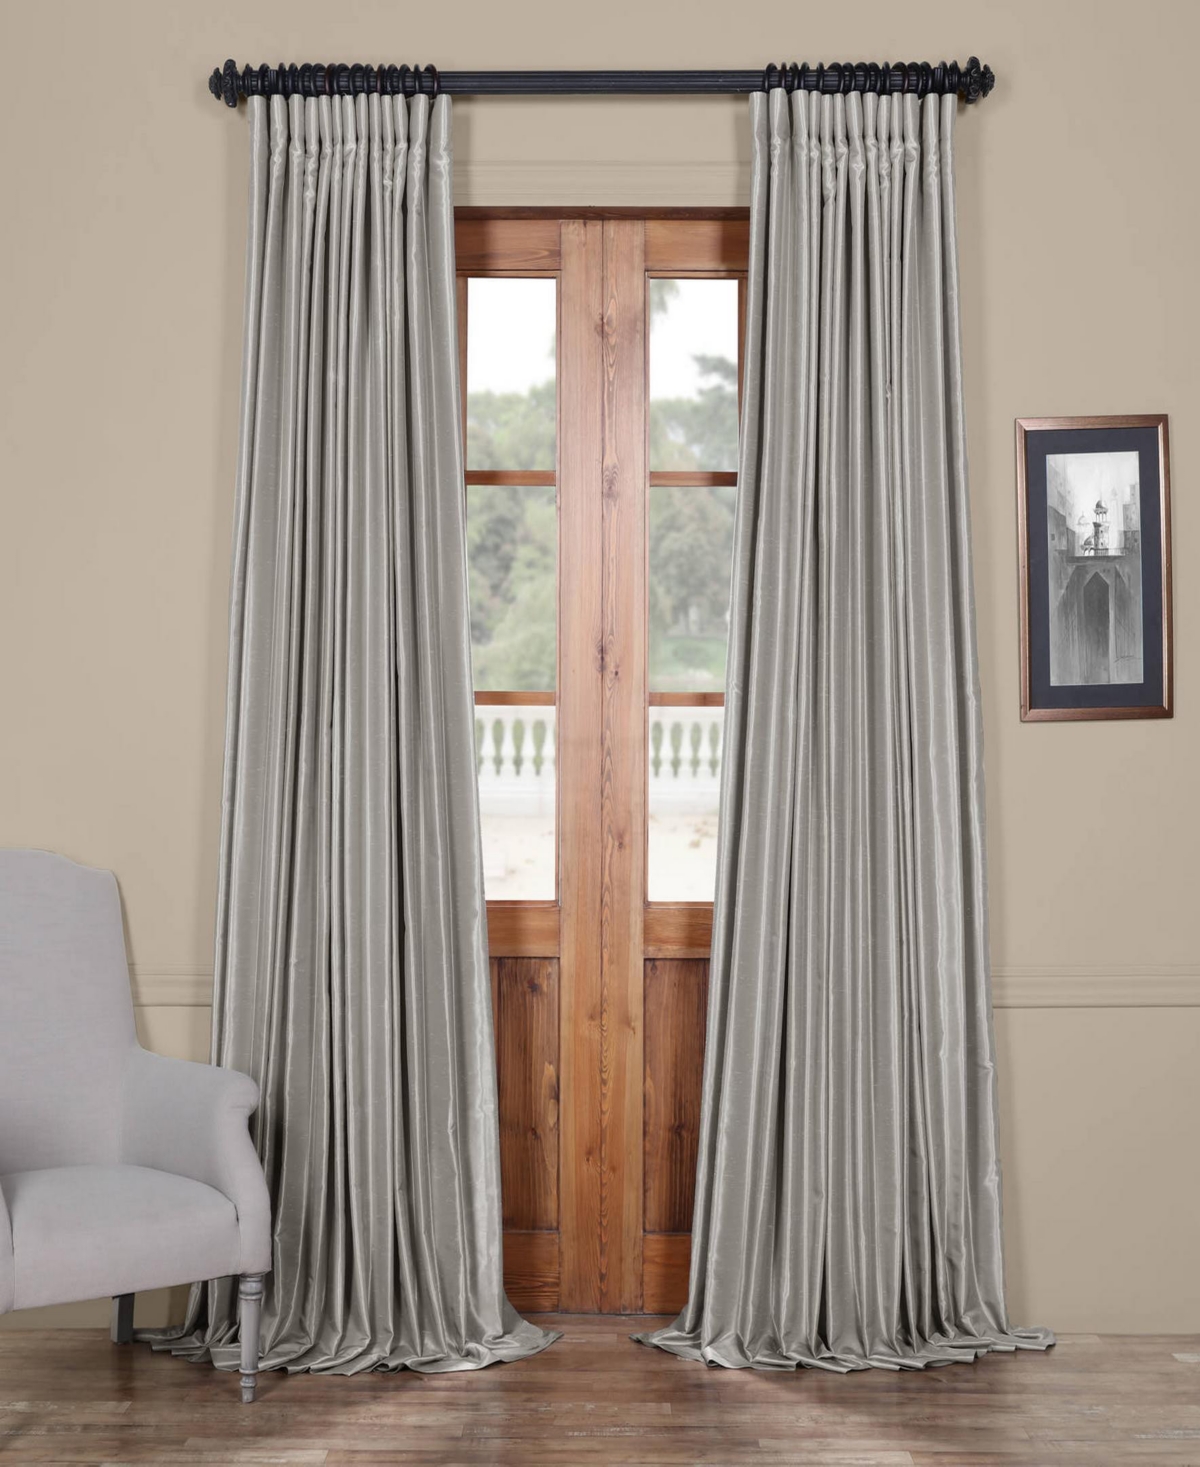 Width & Length Chose Top Pair of White Faux Silk Dupioni Curtains with Lining